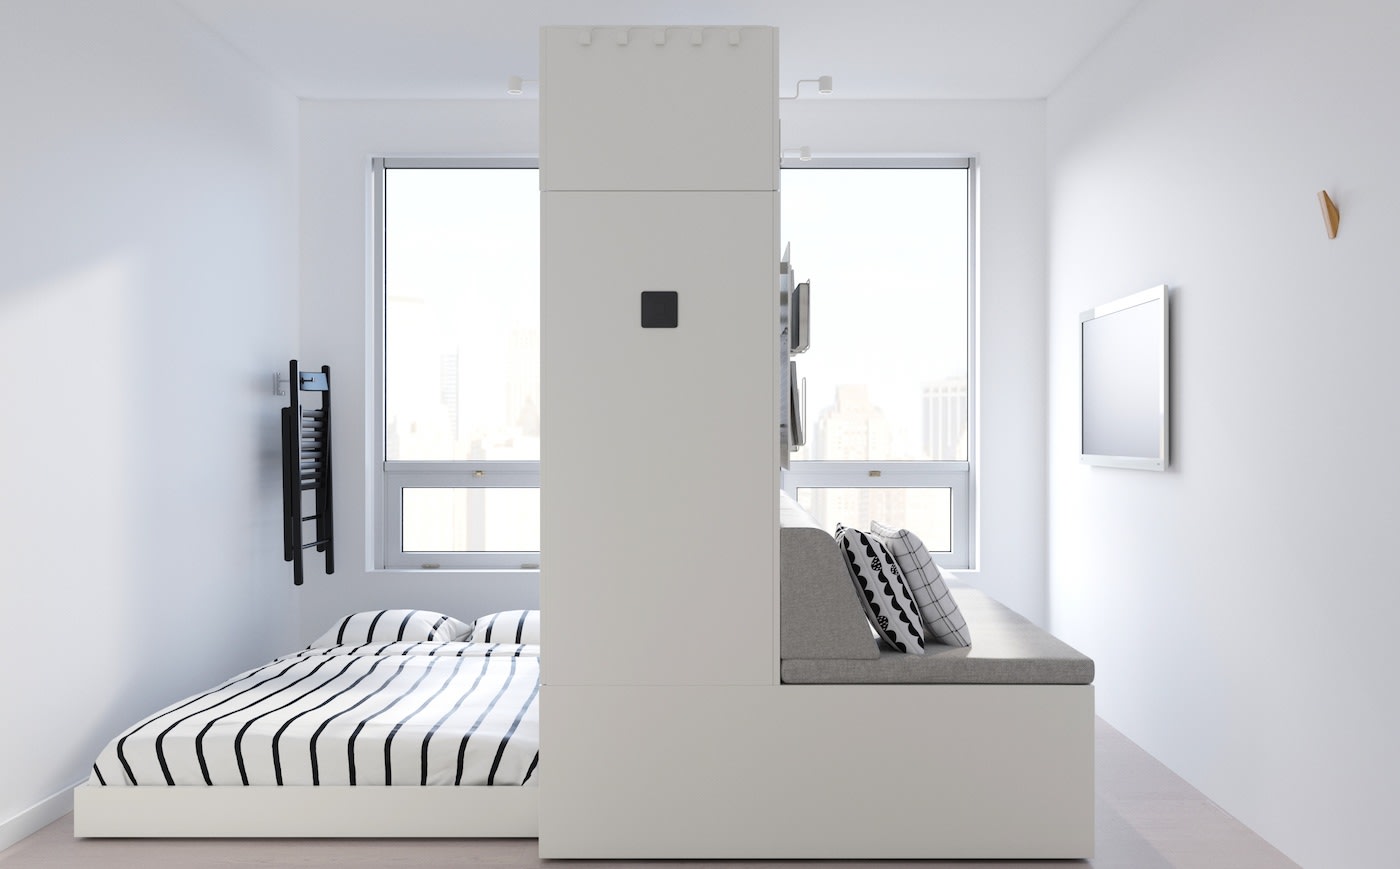 Ikea's robotic 'furniture of the future' transforms 1 room into 3 for the ultimate minimalist aesthetic